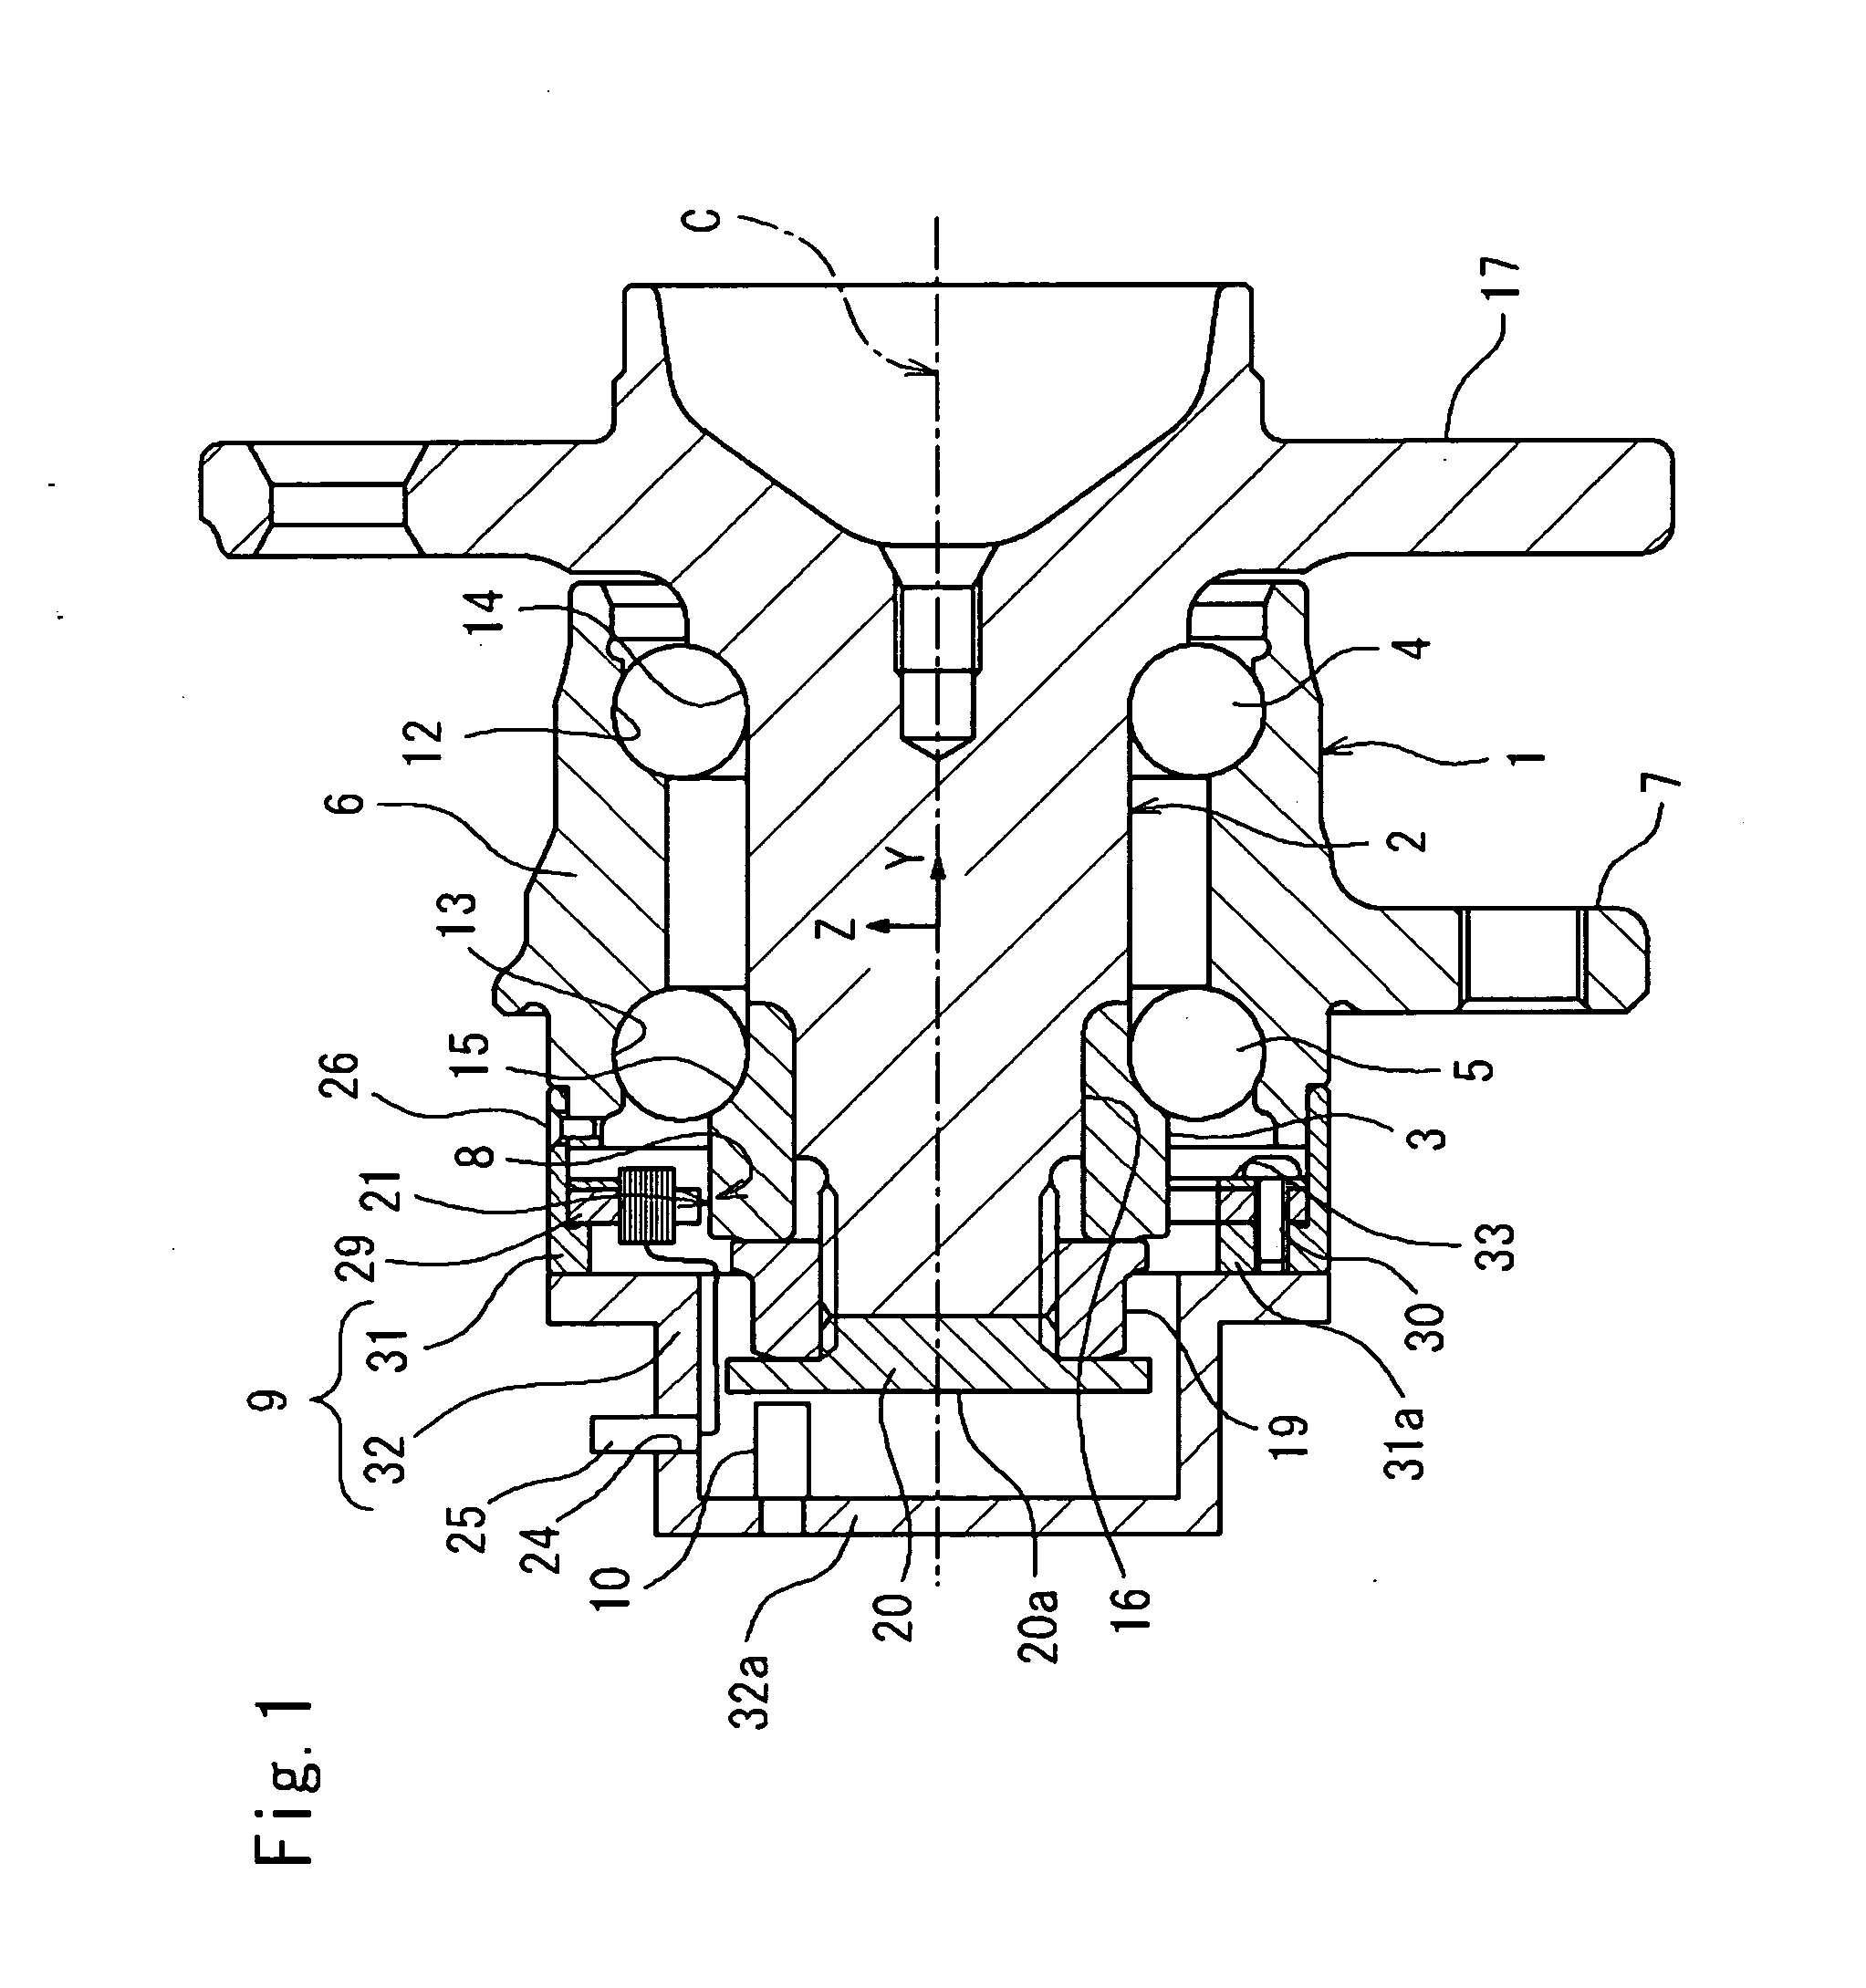 Sensor-equipped rolling bearing assembly